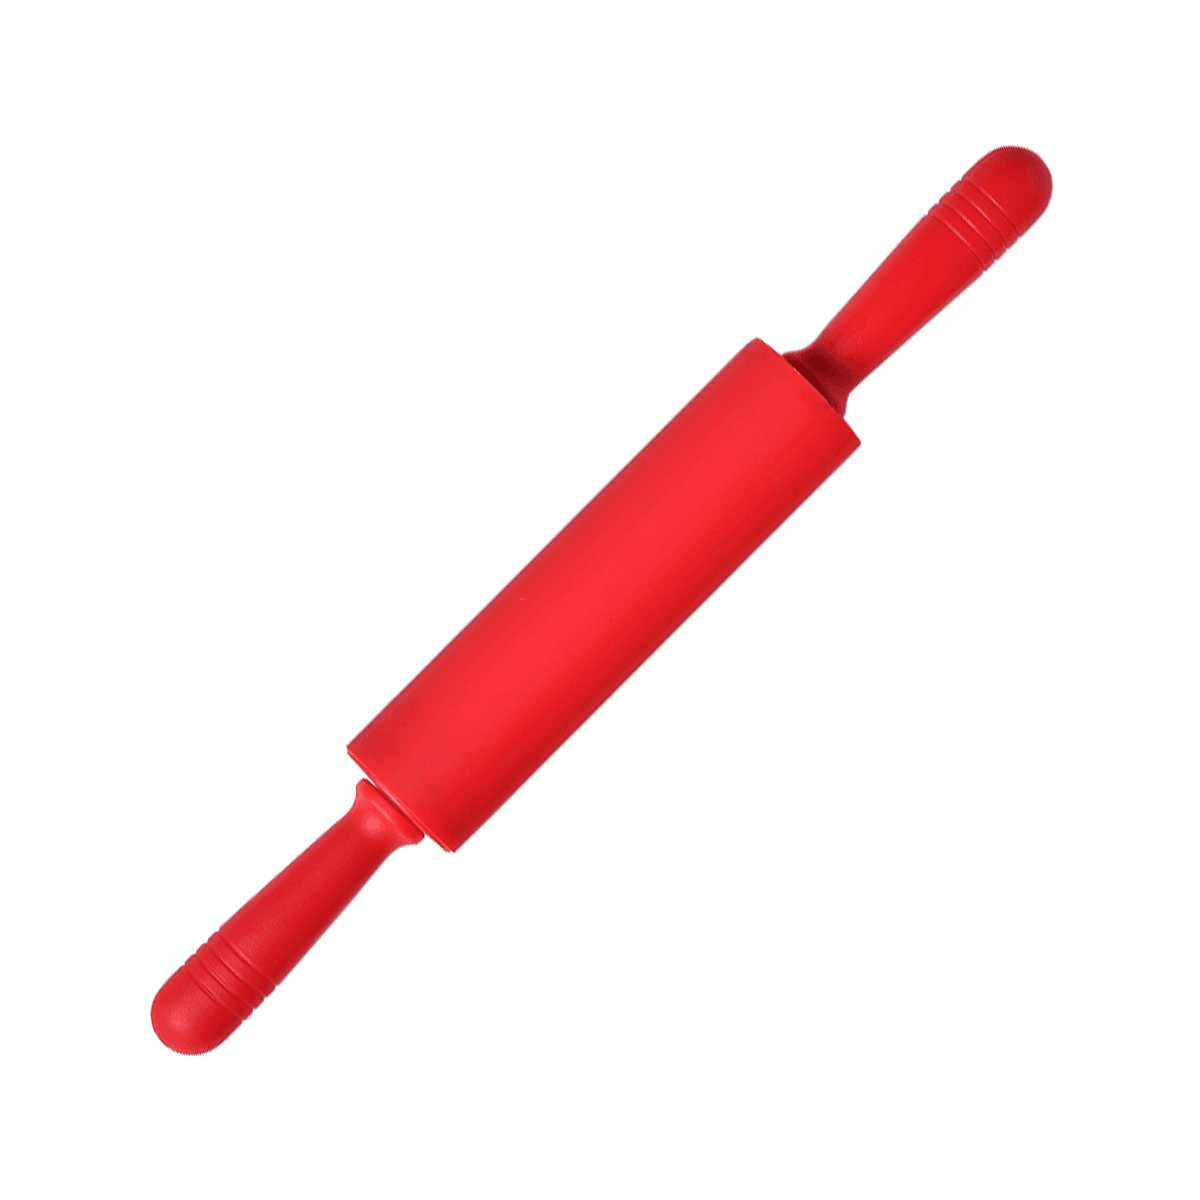 Vague Silicone Pastry Rolling Pin 45.5 cm Red Plastic Silicone